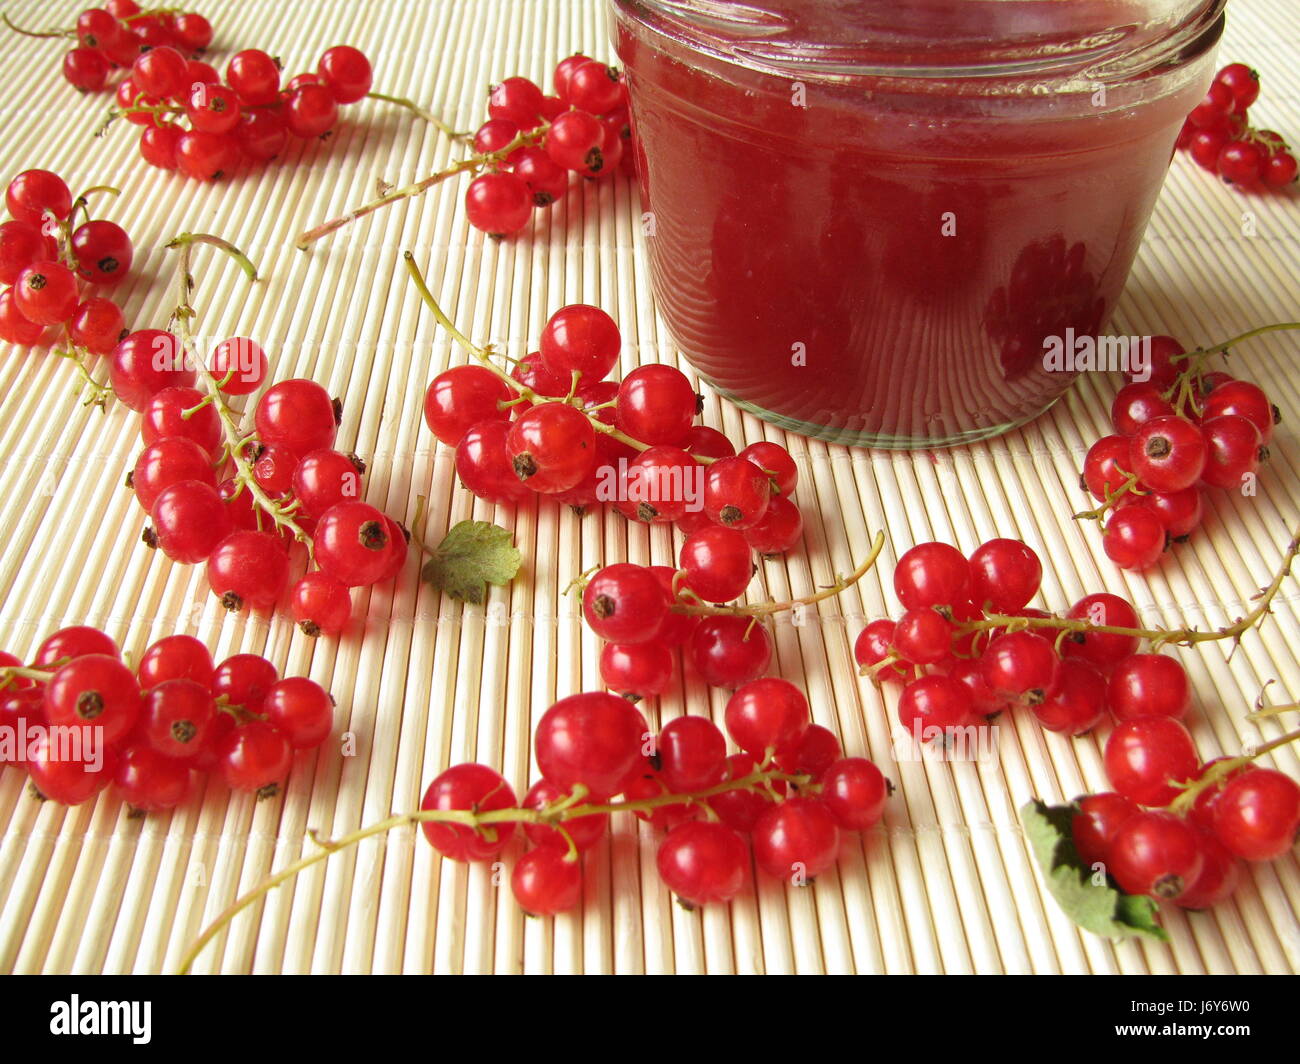 jam black currants ruddiness red sweetly progenies fruits berries jelly Stock Photo